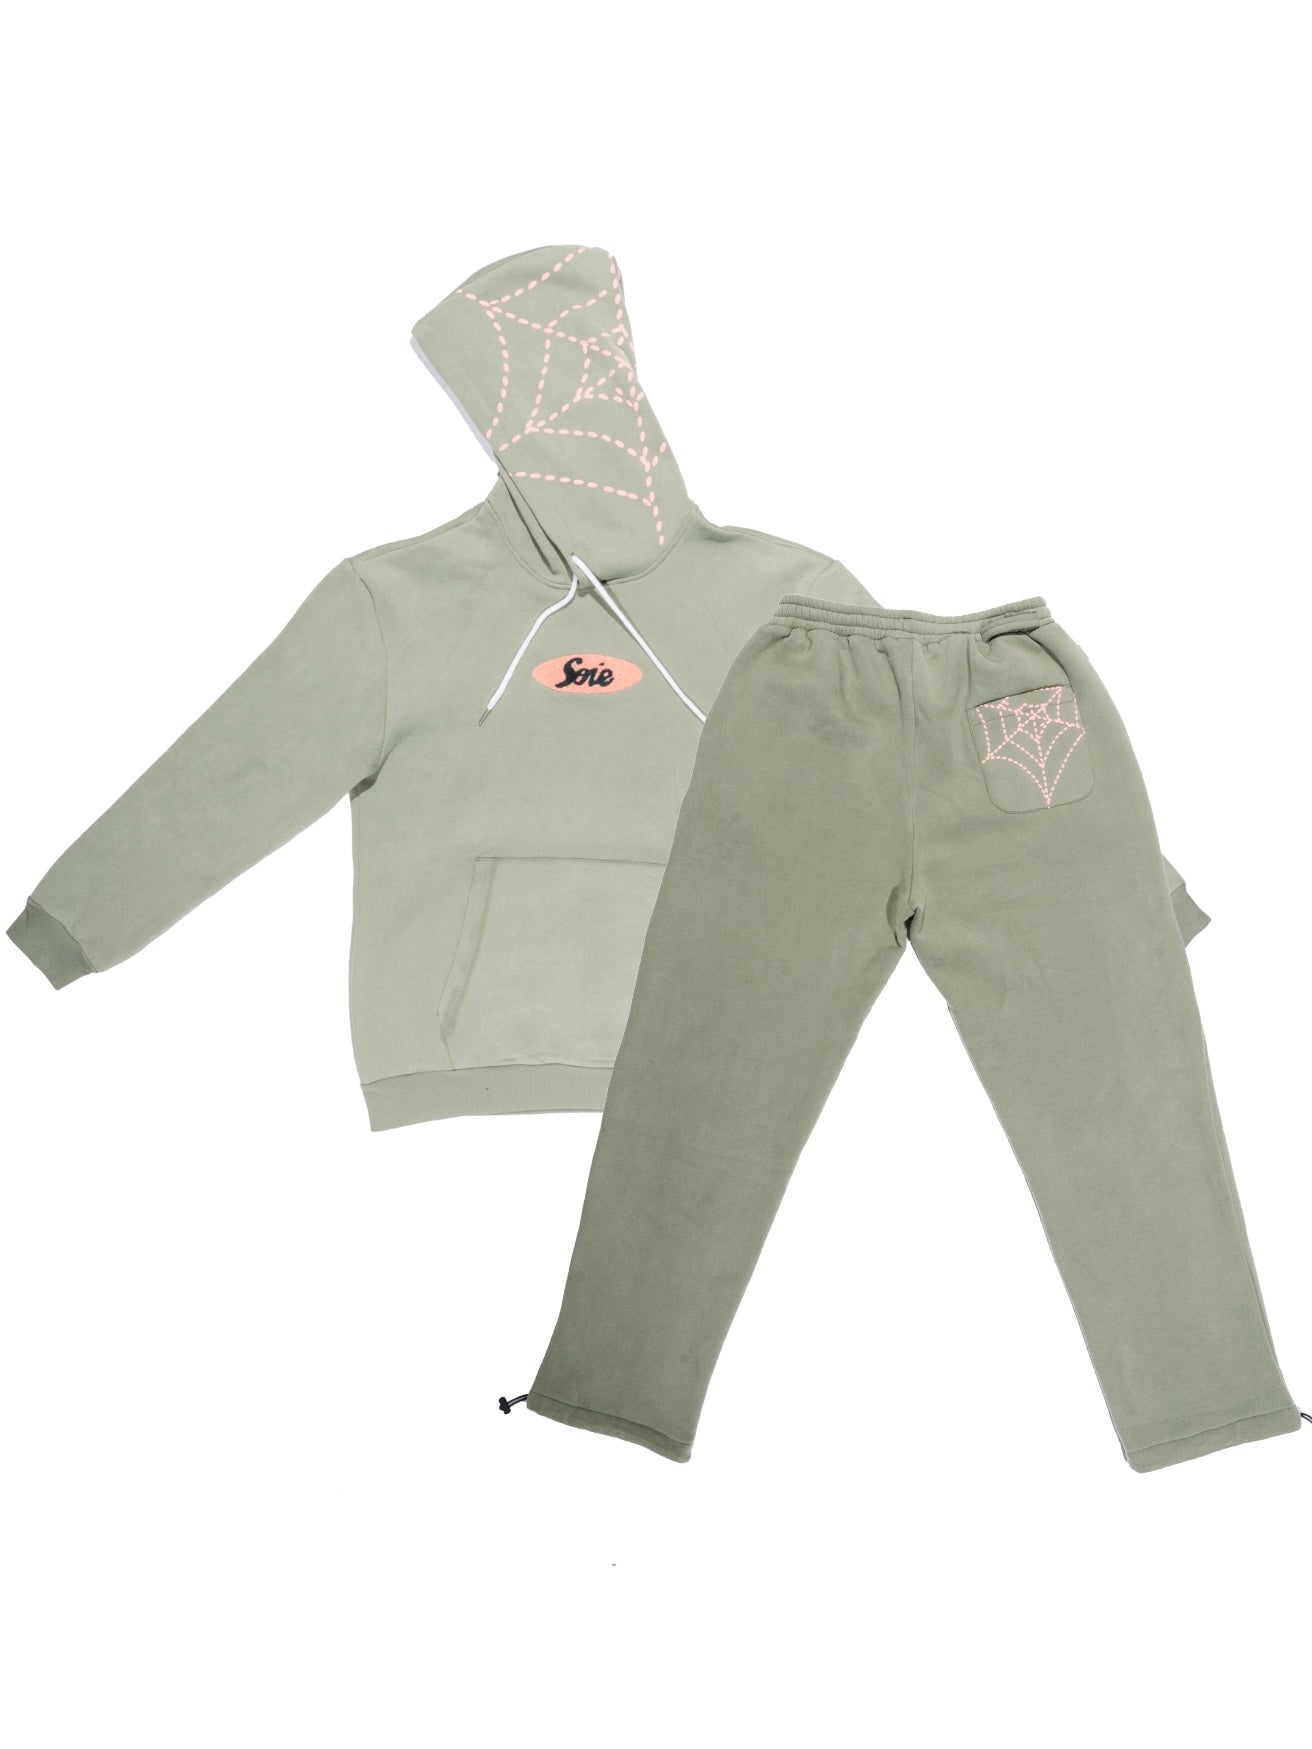 Green Chenille Satin-Lined Sweatsuit